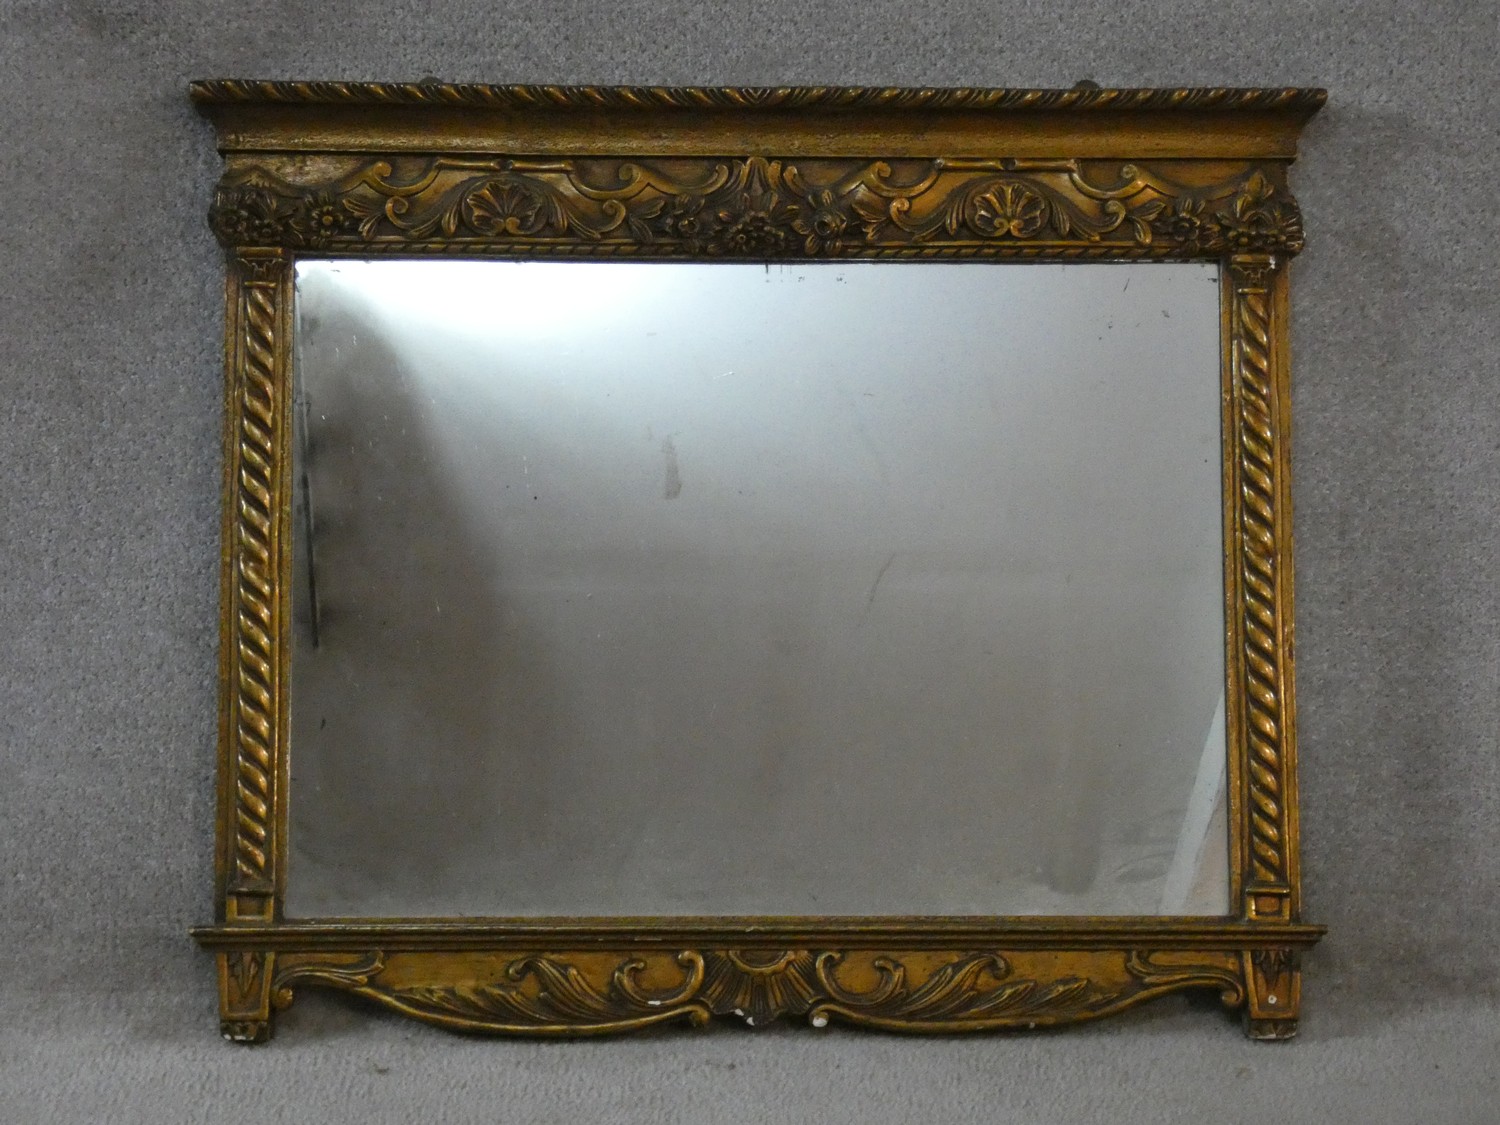 A 19th century gilt and gesso framed overmantel mirror with original plate flanked by spiral twist